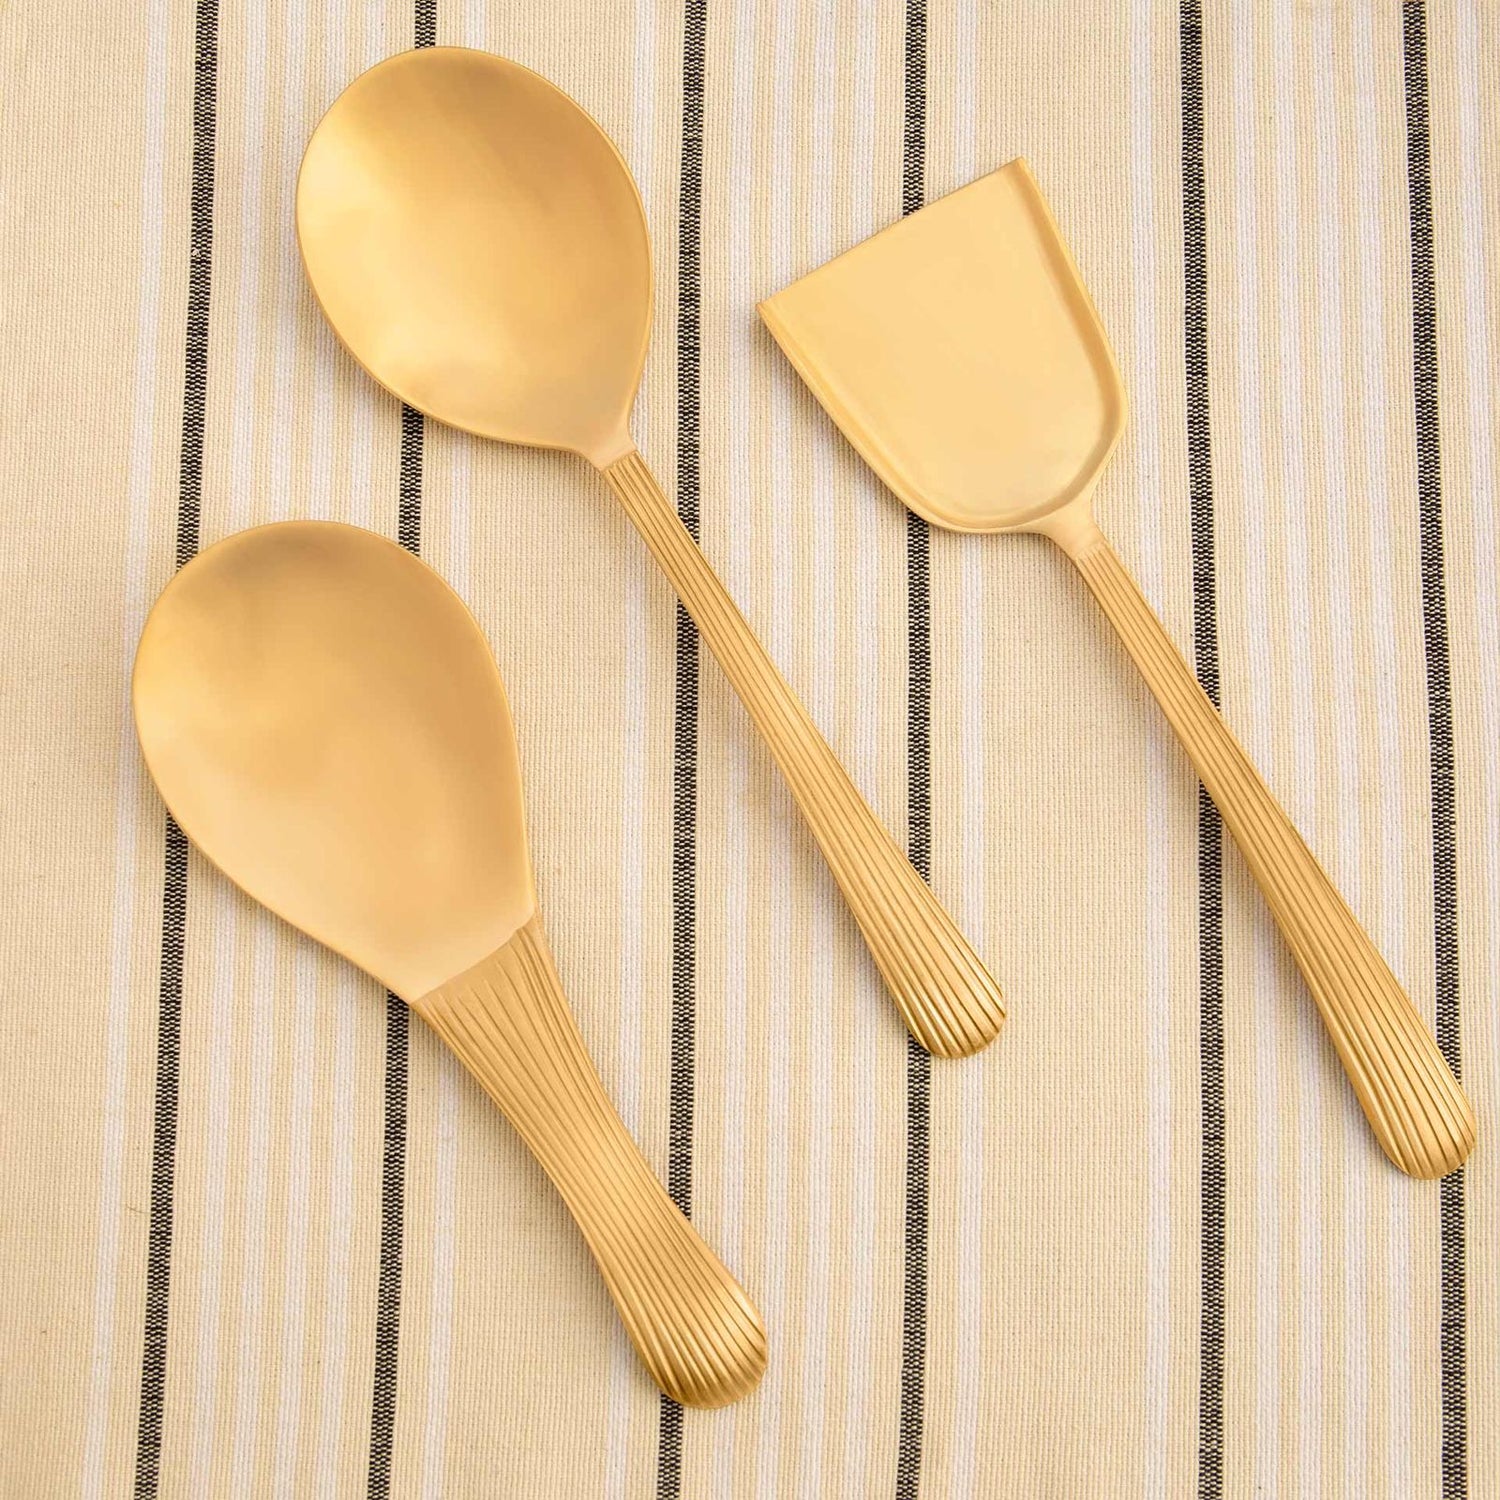 BZAAR Brass Antique Gold-colored Celestial Serving Spoon - Set of 3